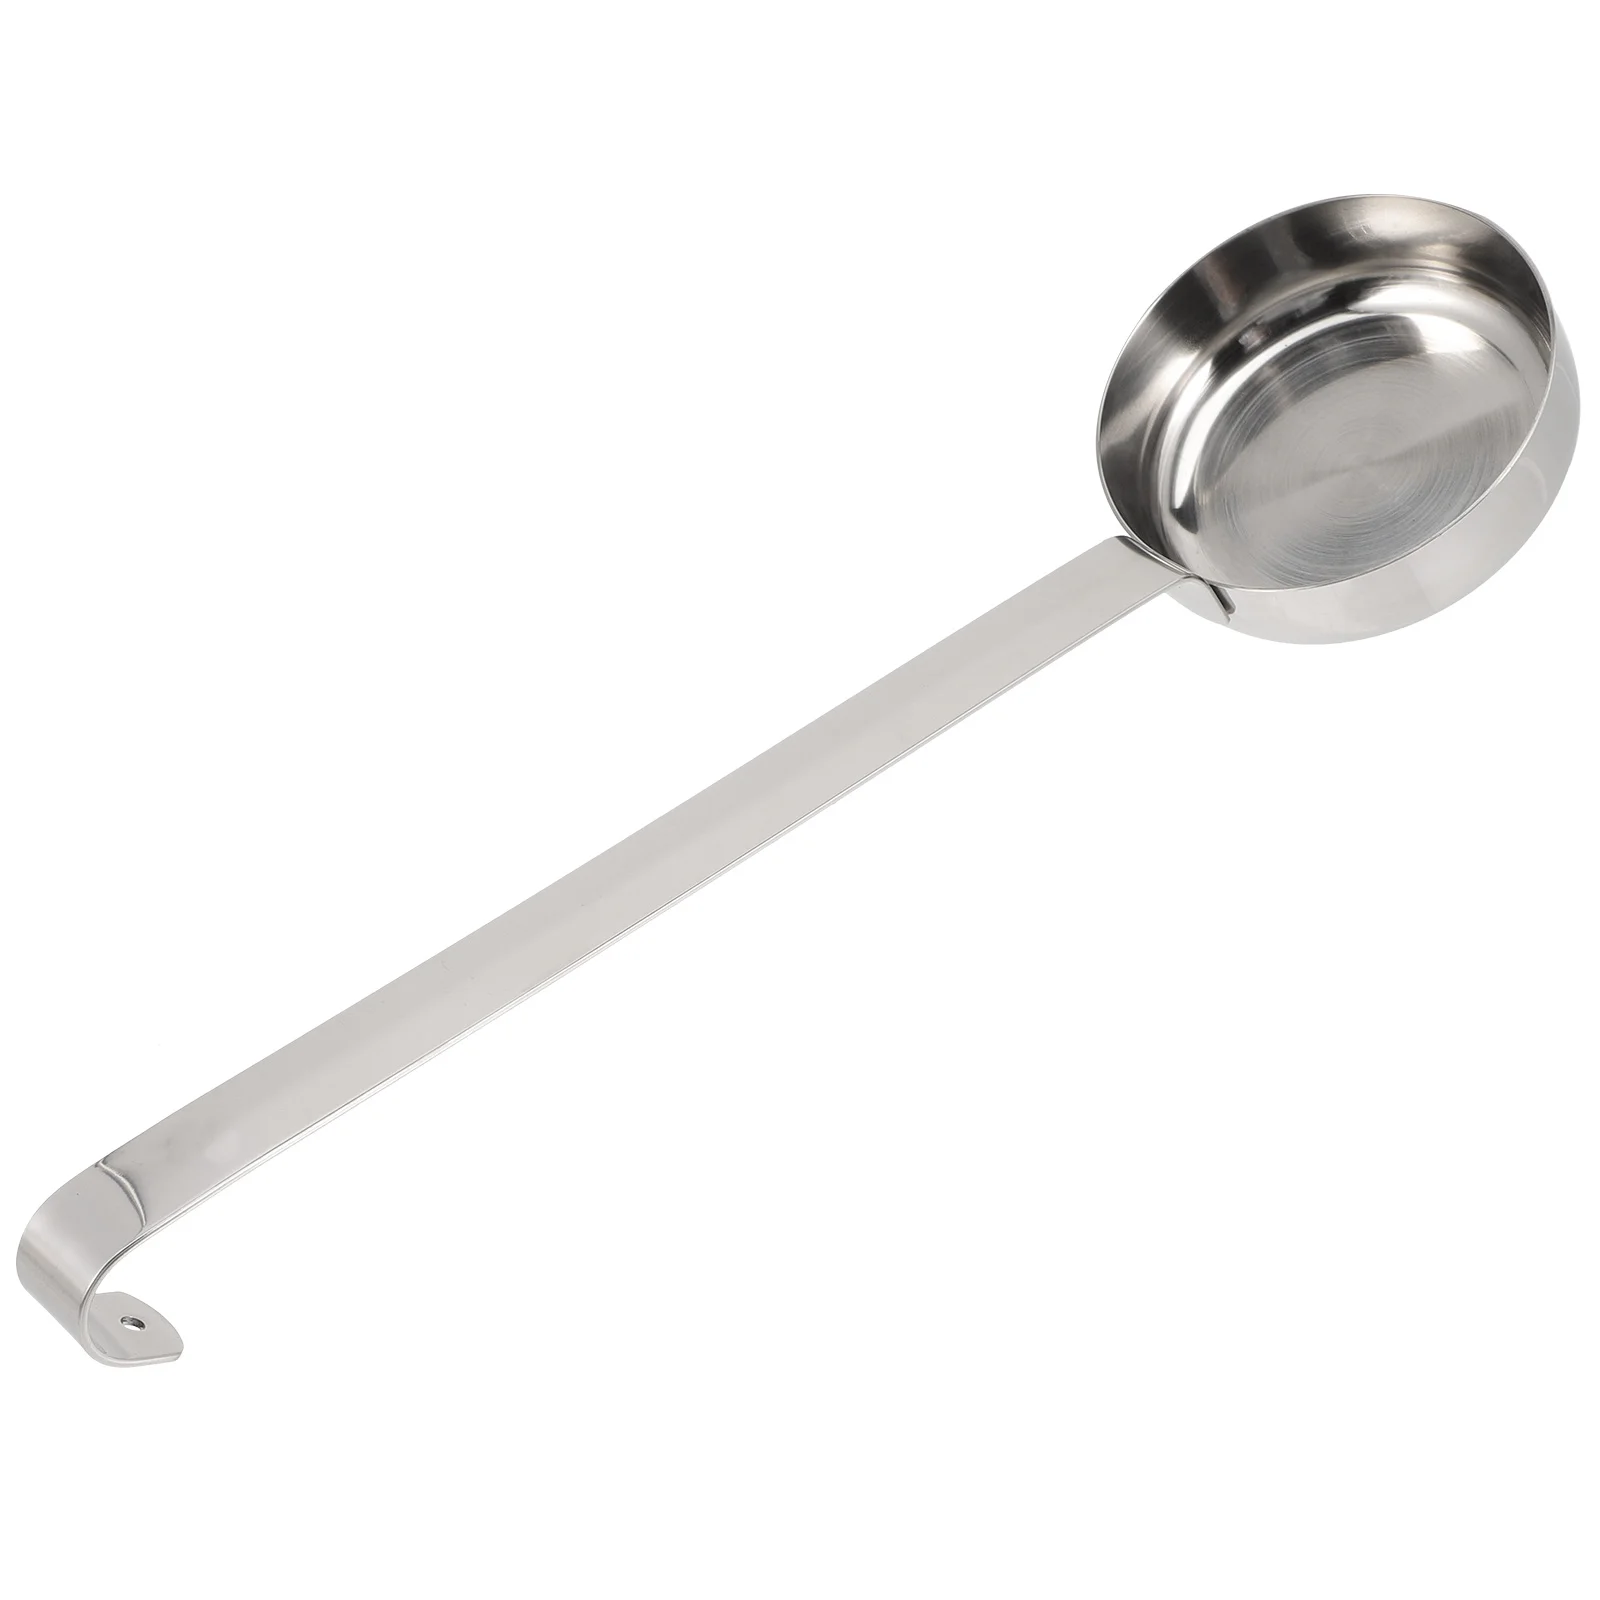 

Ladle Spoon Sauce Pizza Portioner Soup Portion Kitchen Serving Spread Control Spoons Measuring Scoop Steel Stainless Food Flat